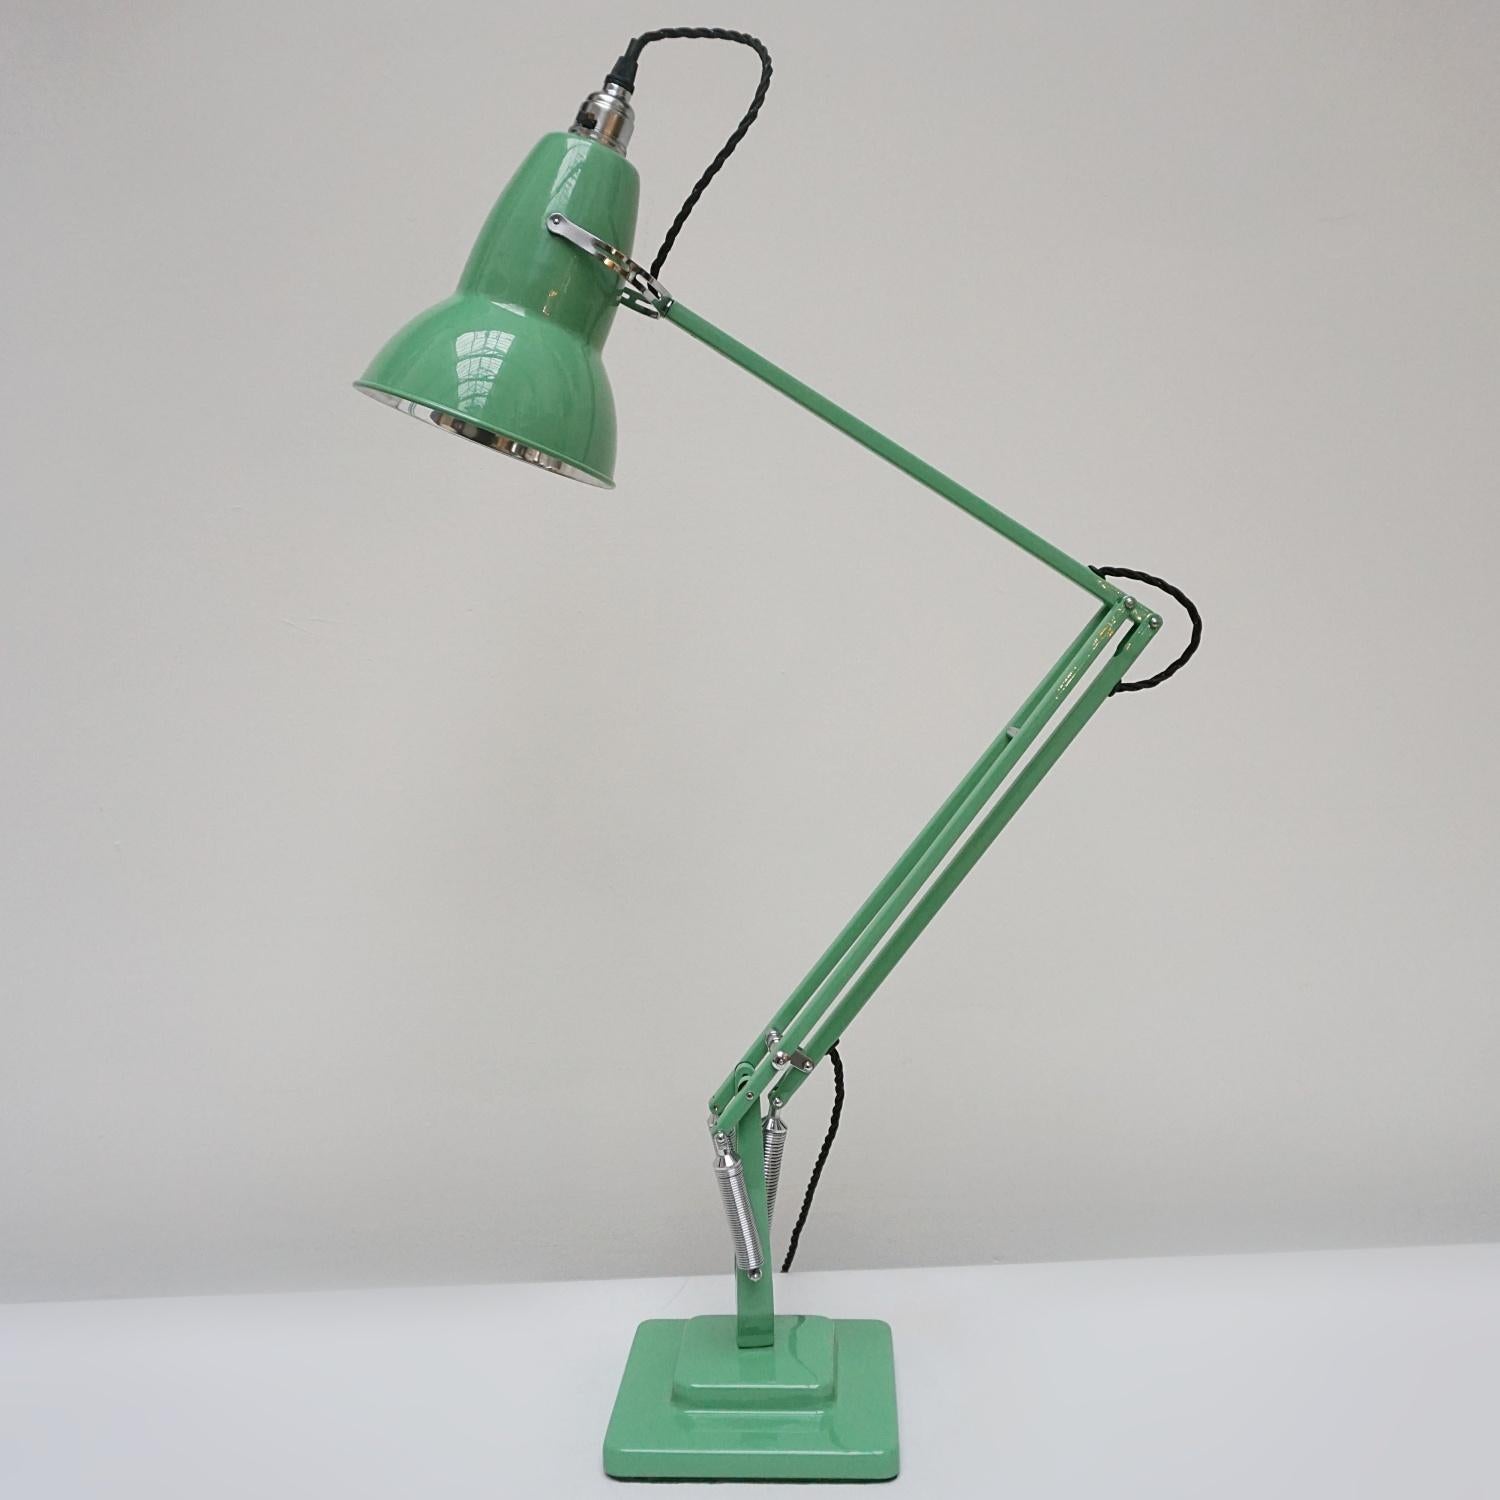 'Three-spring' chromed and polished yellow painted Anglepoise desk lamp by Herbert Terry & Sons. Two step base and perforated lamp shade. Original stamps to stem. The three spring Anglepoise lamp was first released by Herbert Terry &Sons in 1935.